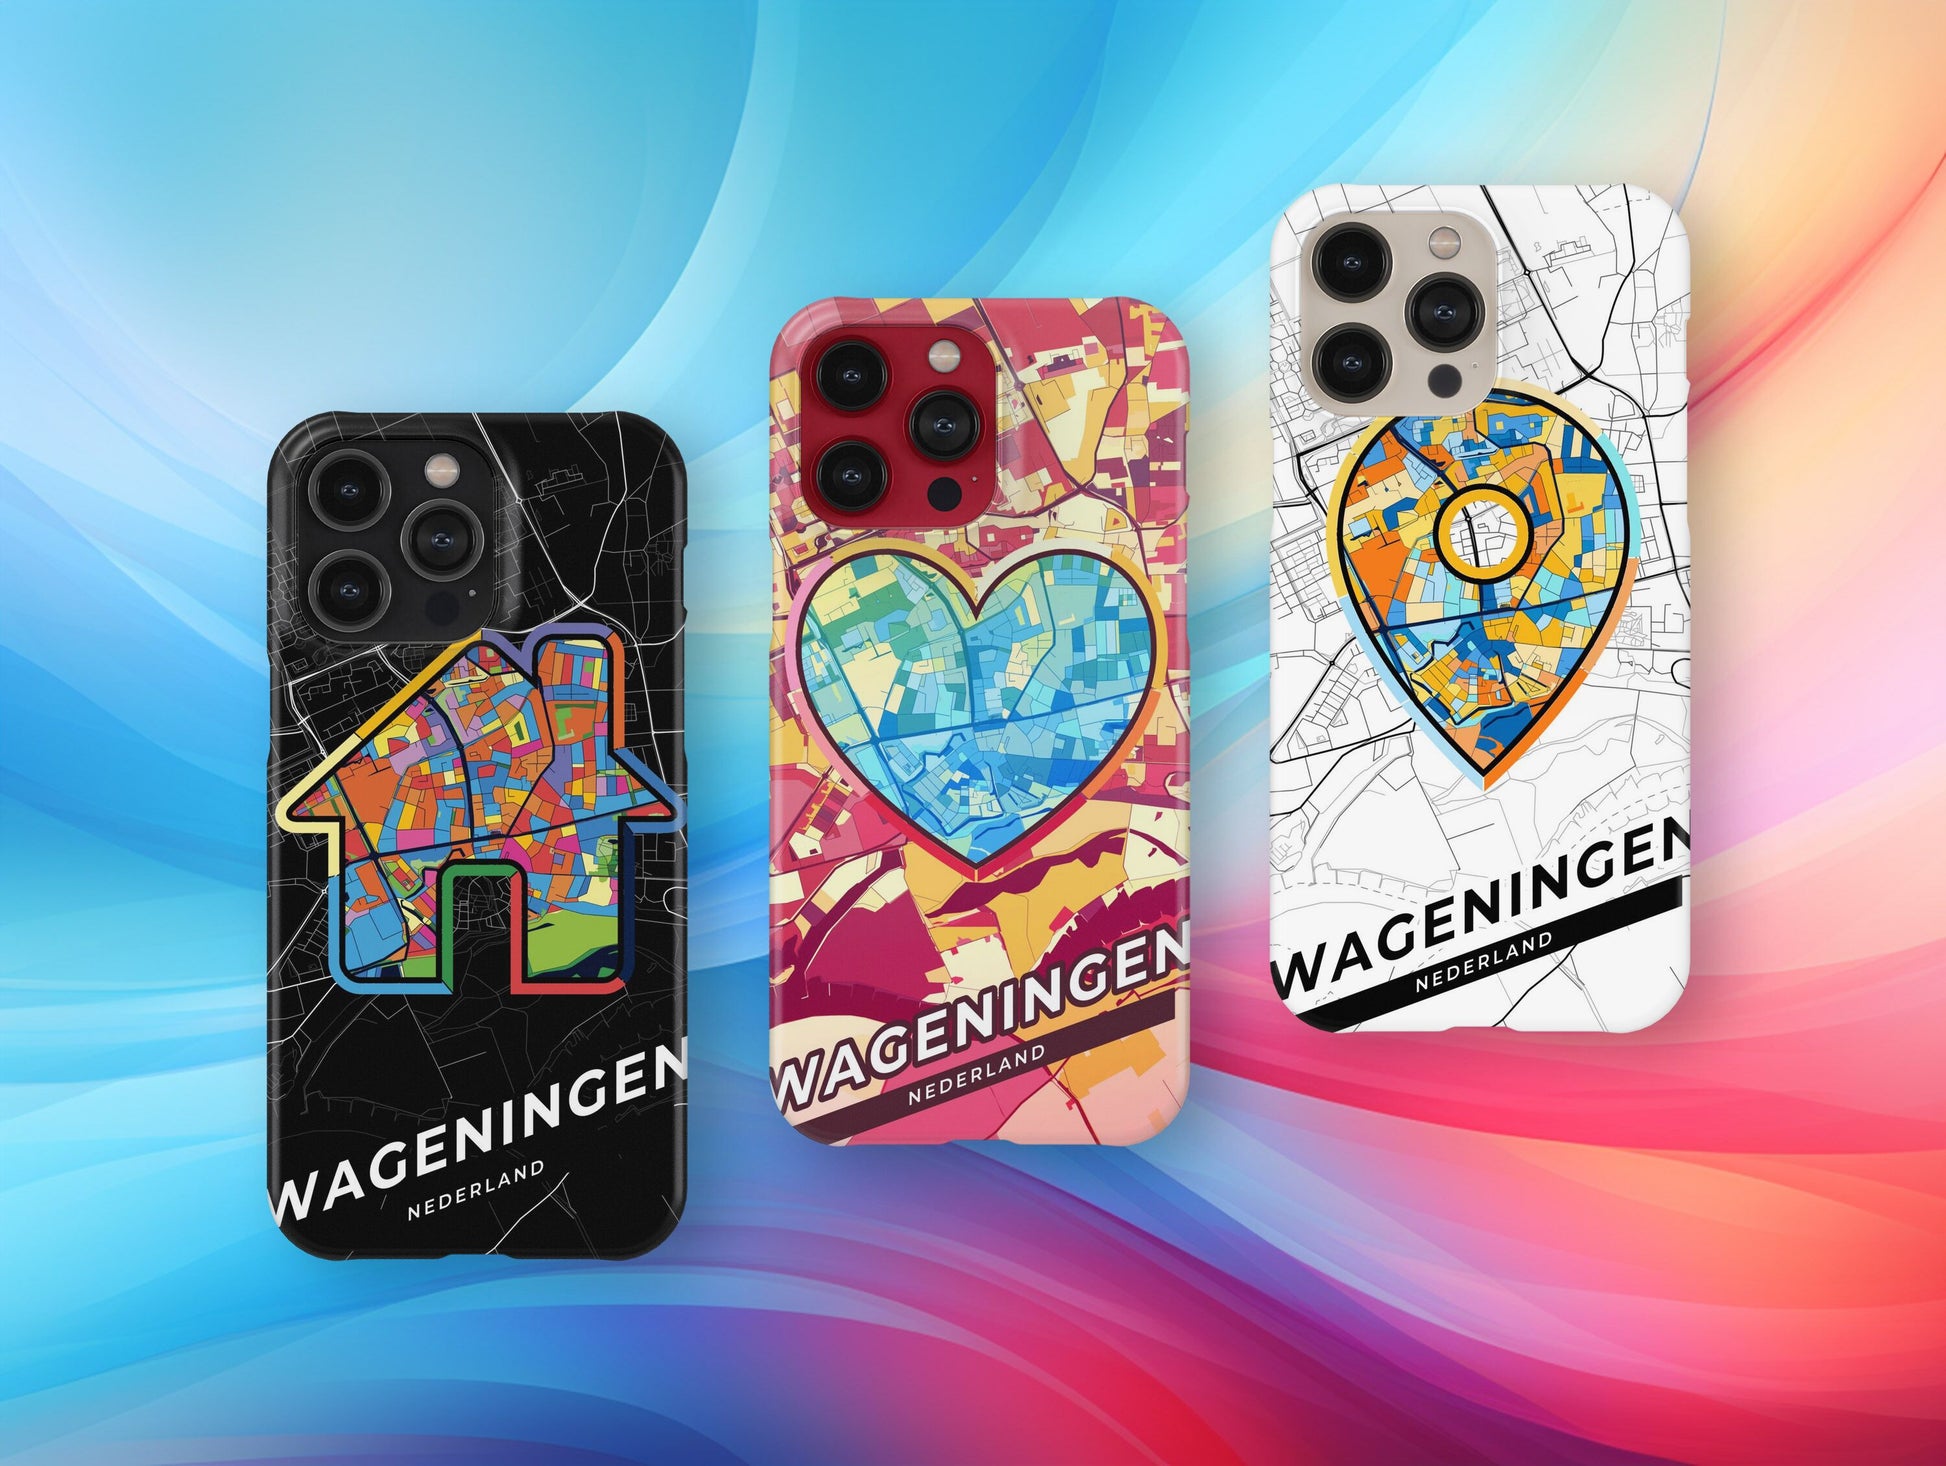 Wageningen Netherlands slim phone case with colorful icon